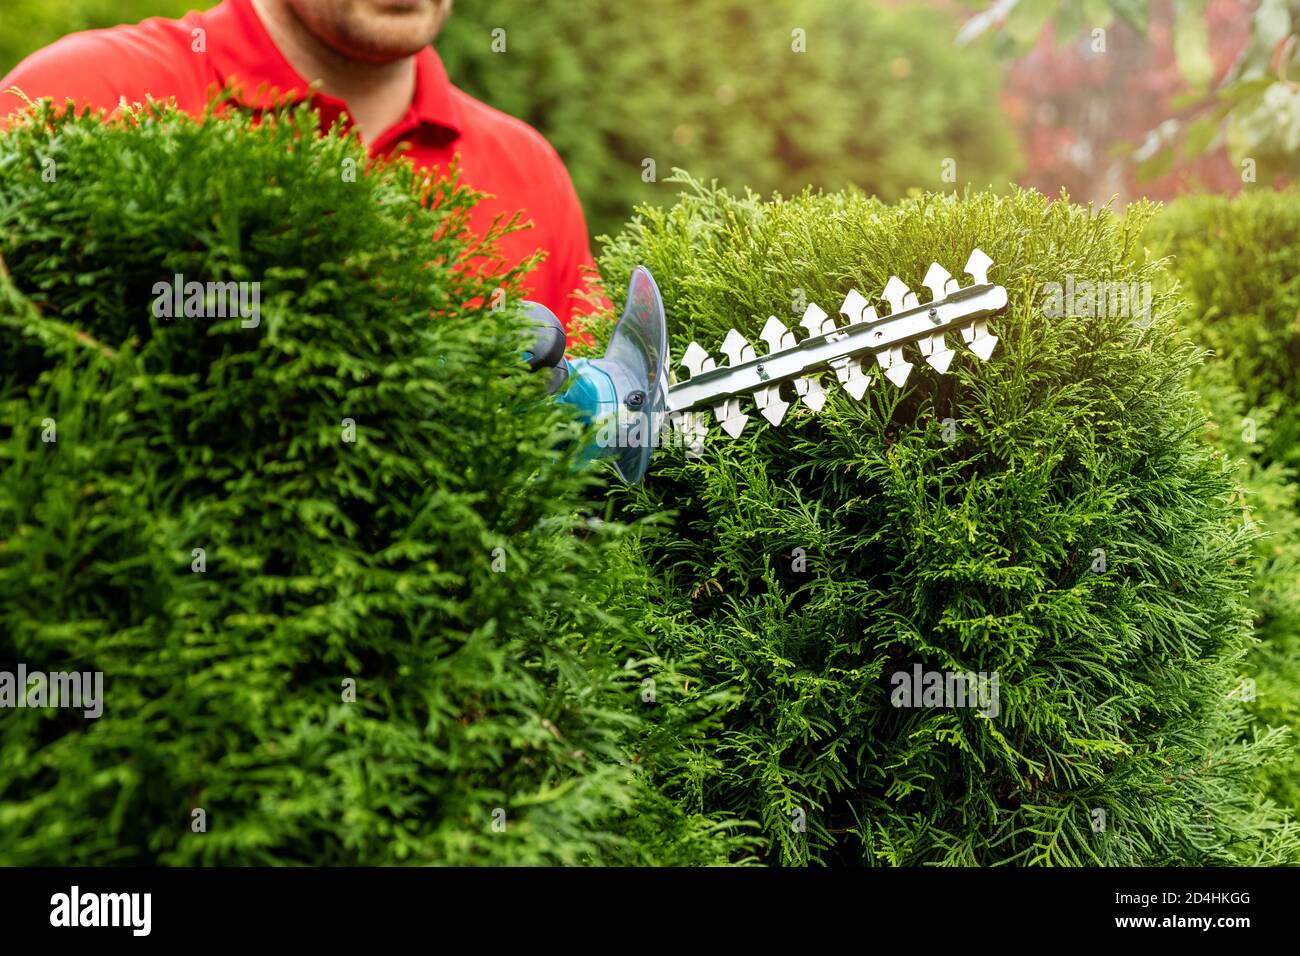 gardening services - gardener trimming and shaping evergreen thuja hedge with electric trimmer Stock Photo